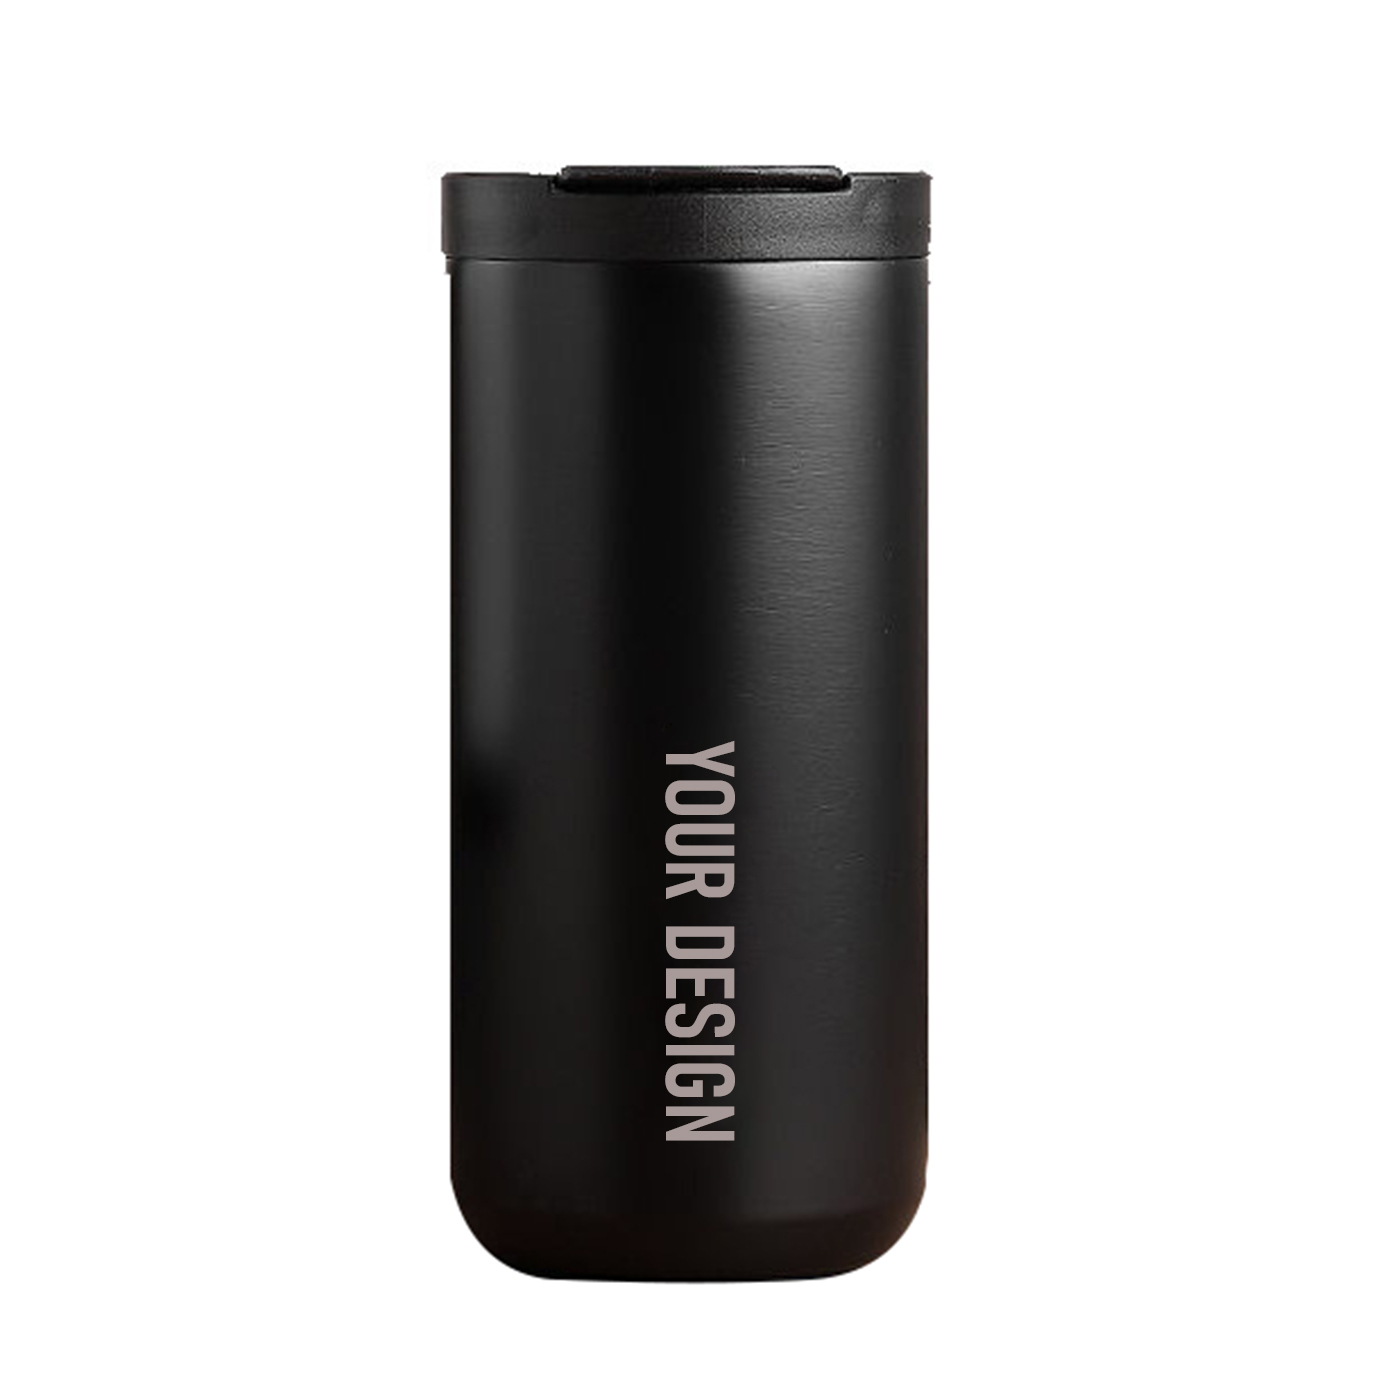 Stainless Steel Insulated Travel Car Mug1